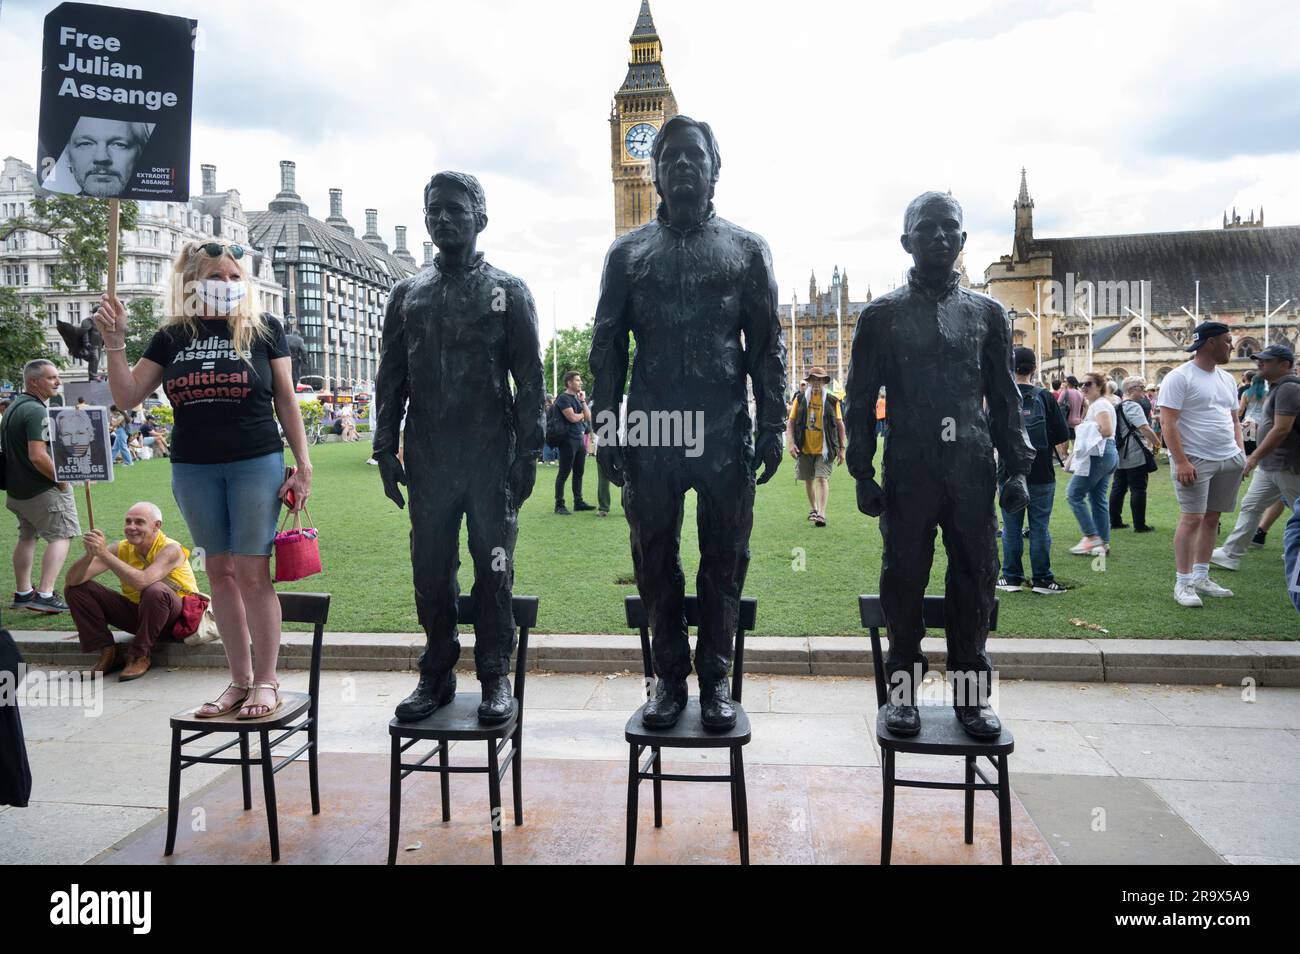 Parliament Square, London. Sculptures of Edward Snowden, Julian Assange and Chelsea Manning by Italian sculptor Davide Domino during a demonstration t Stock Photo